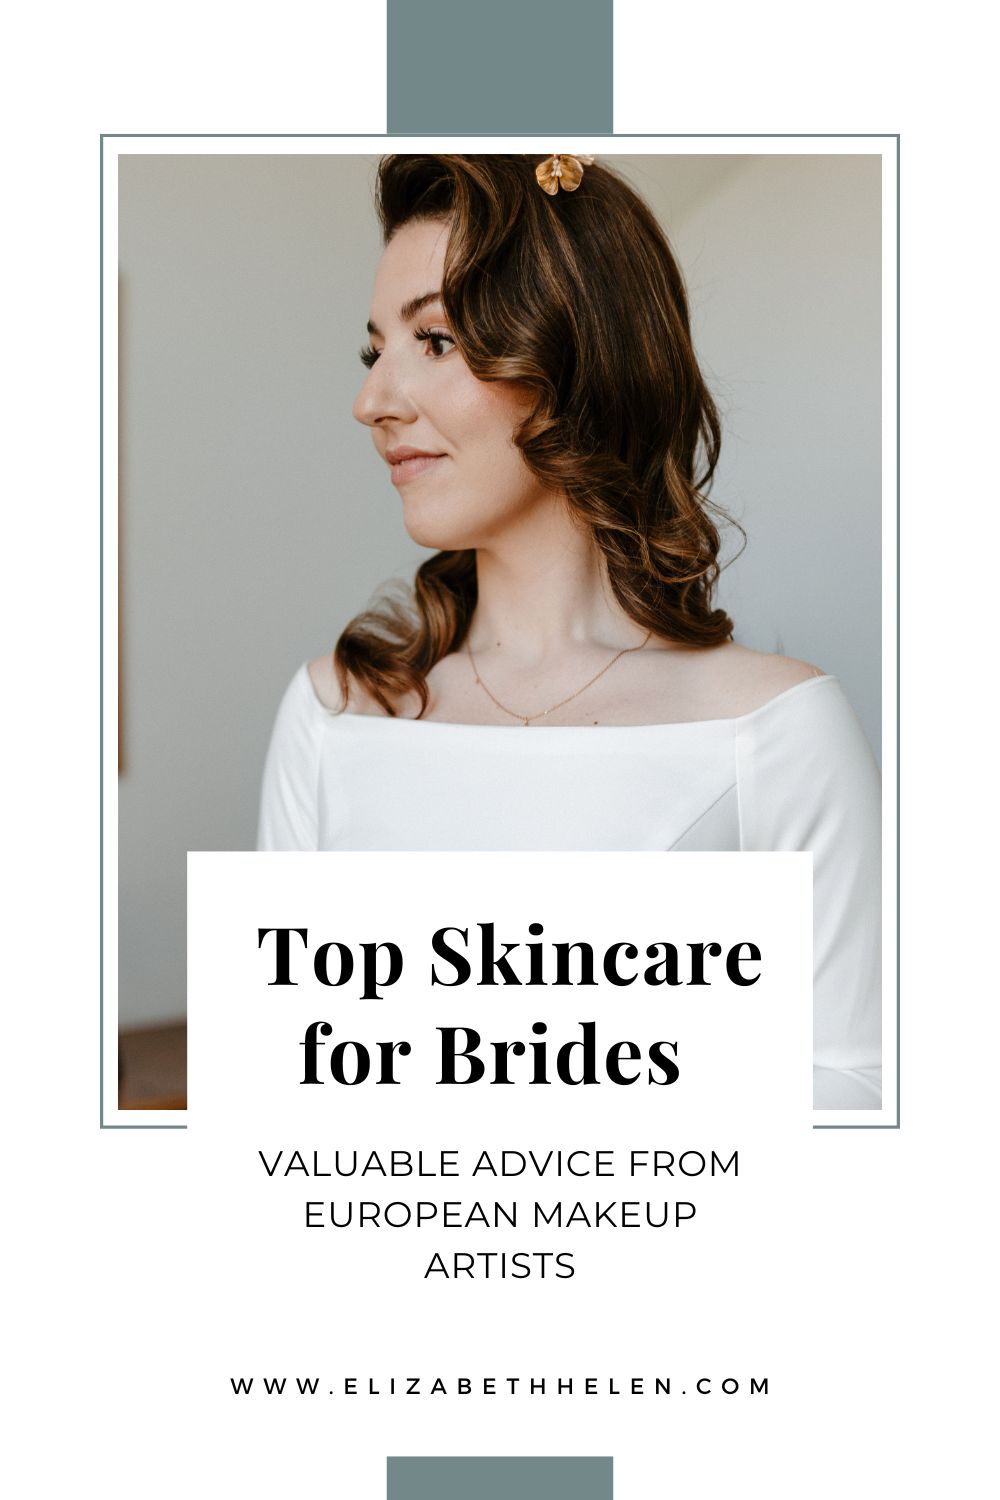 Pinterest - minimal bridal hair and makeup with writing overlay that says "Top Skincare for Brides, Valuable advice from European Makeup Artists"